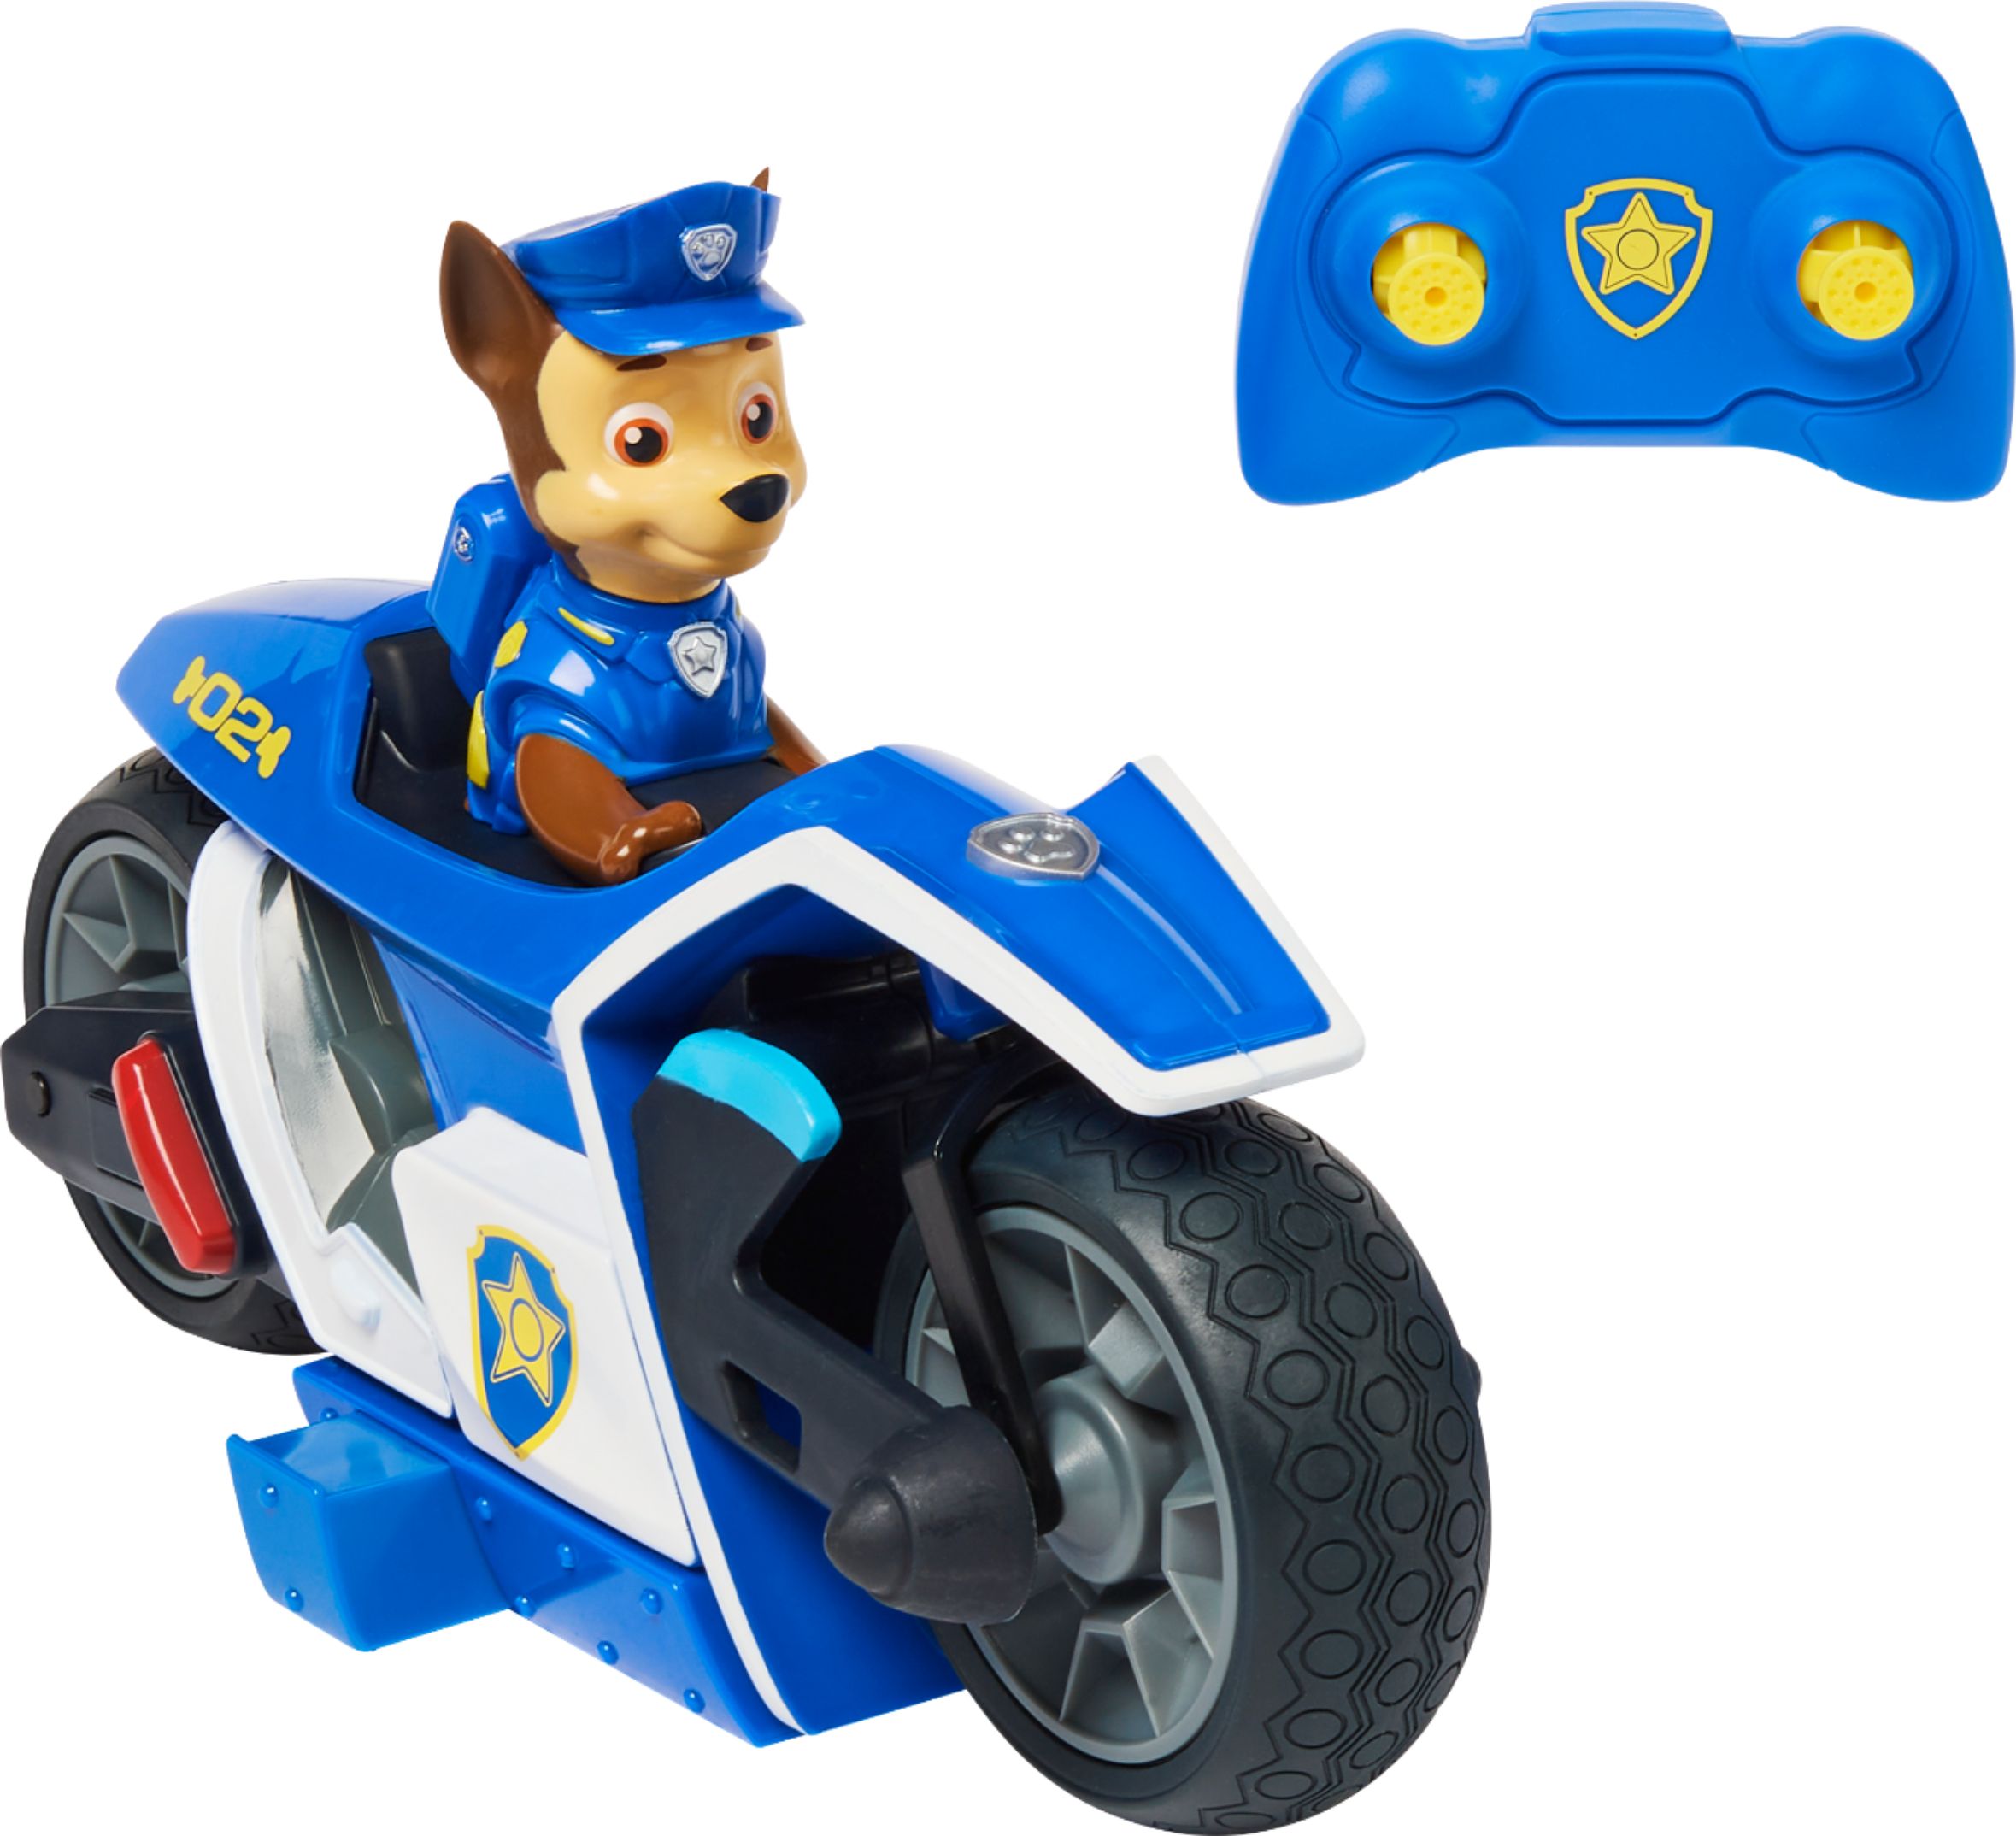 PAW PATROL CHASE MOVIE RC MOTORCYCLE